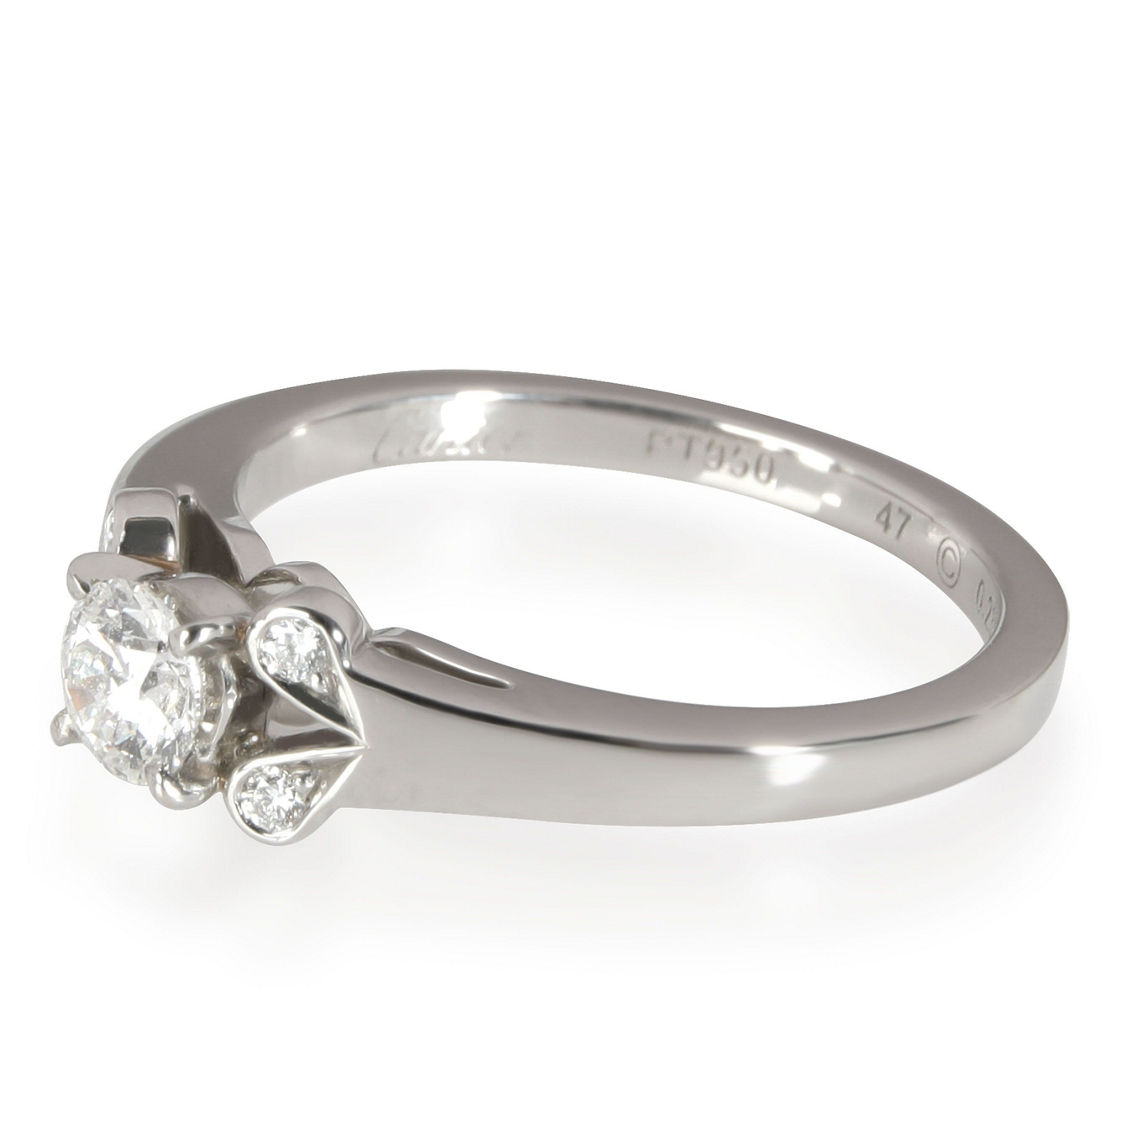 Cartier Ballerine Engagement Ring Pre-Owned - Image 2 of 3